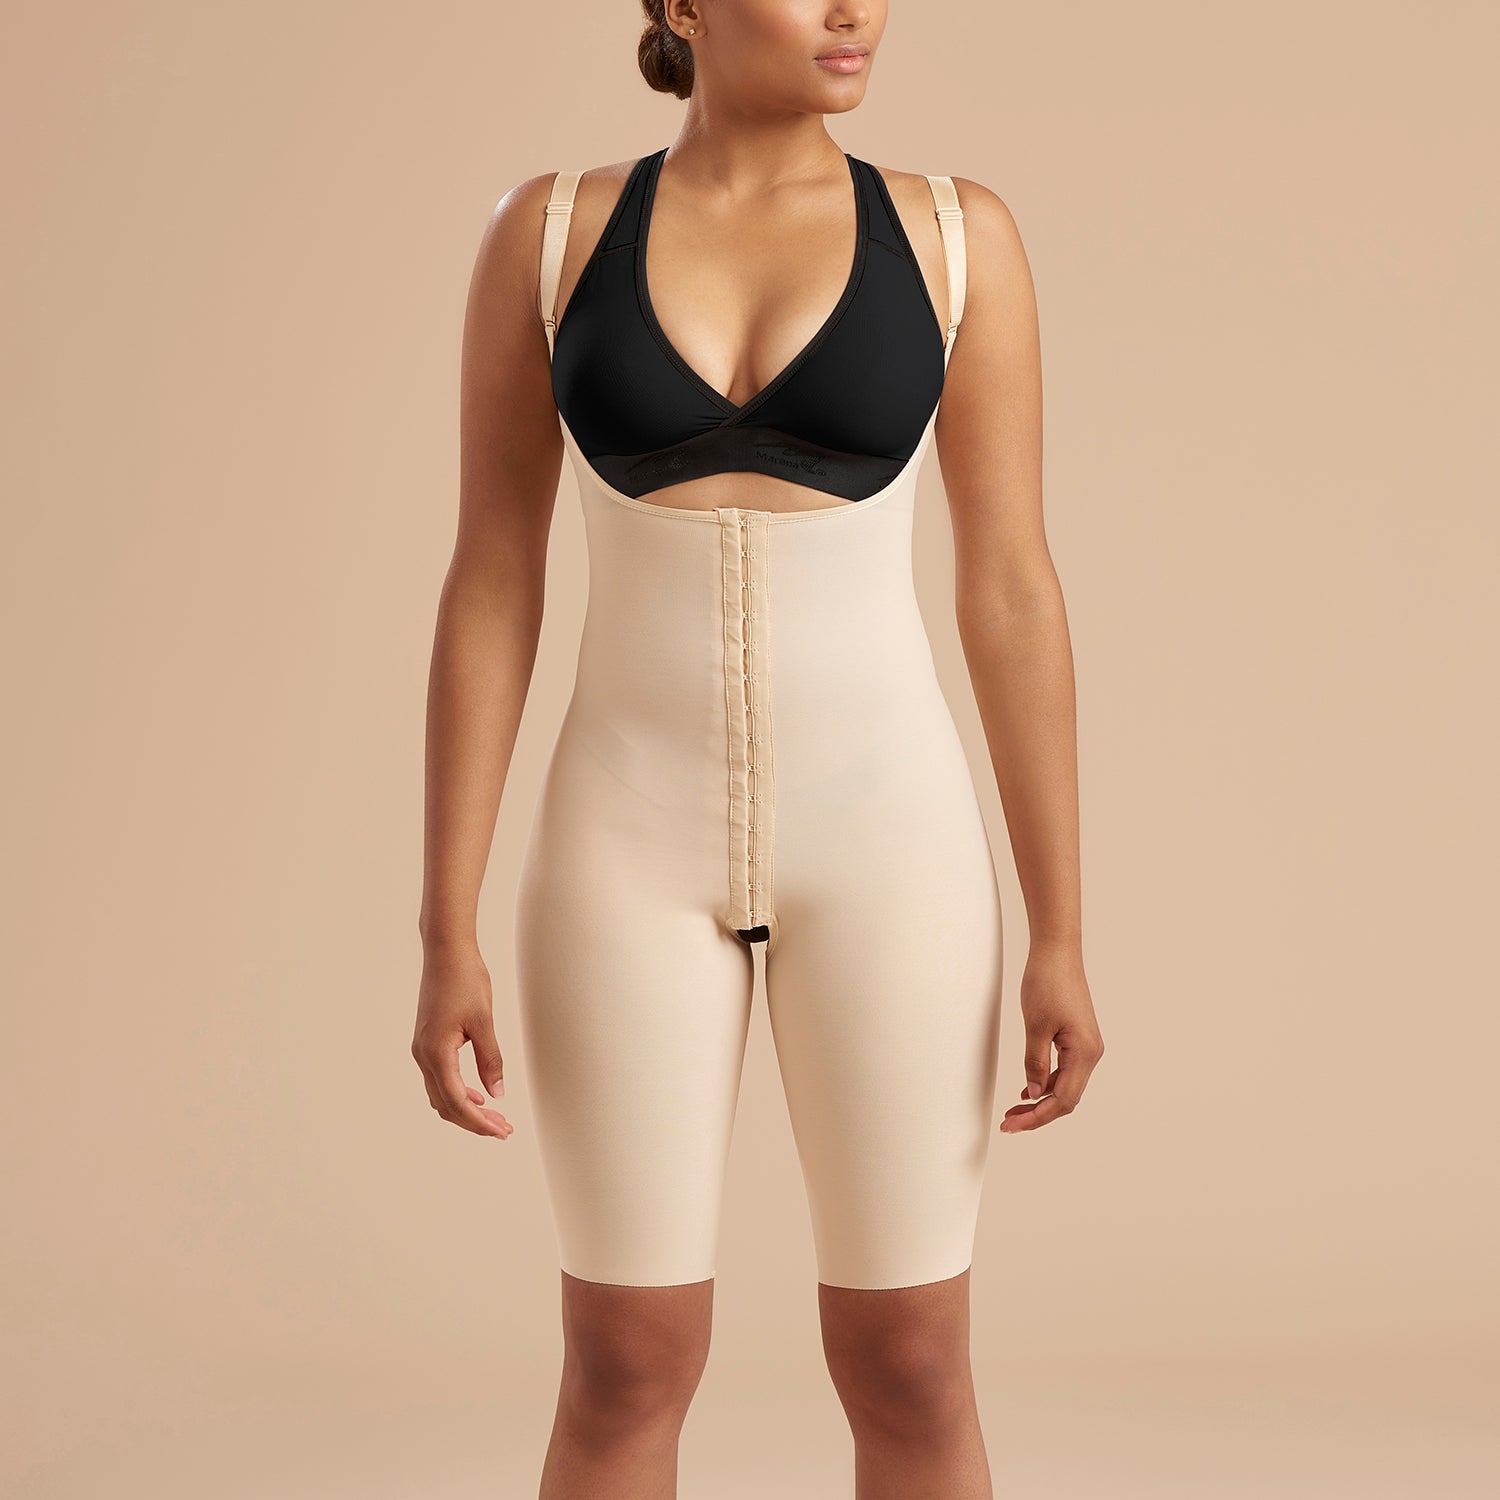 Girdle with High Back - Short Length - Style No. SFBHS